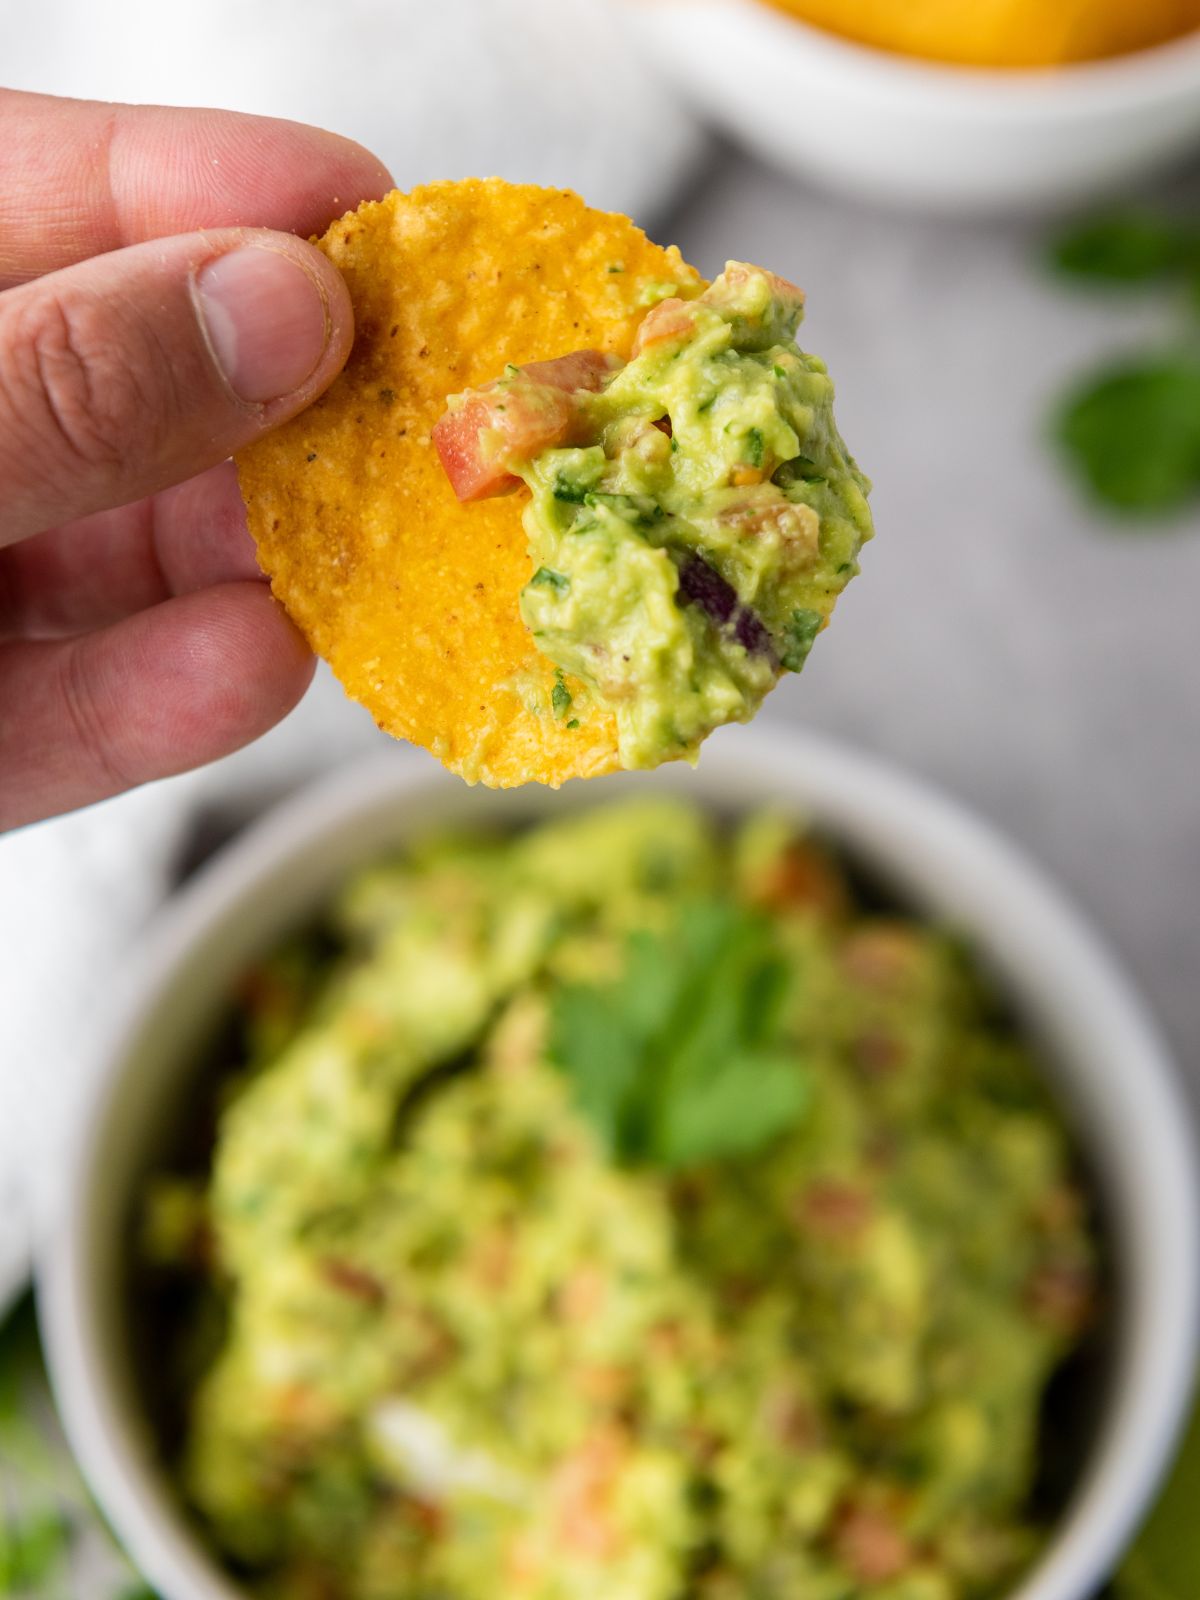 A chip full of guacamole held up to the camera with the bowl of guacamole in the background.